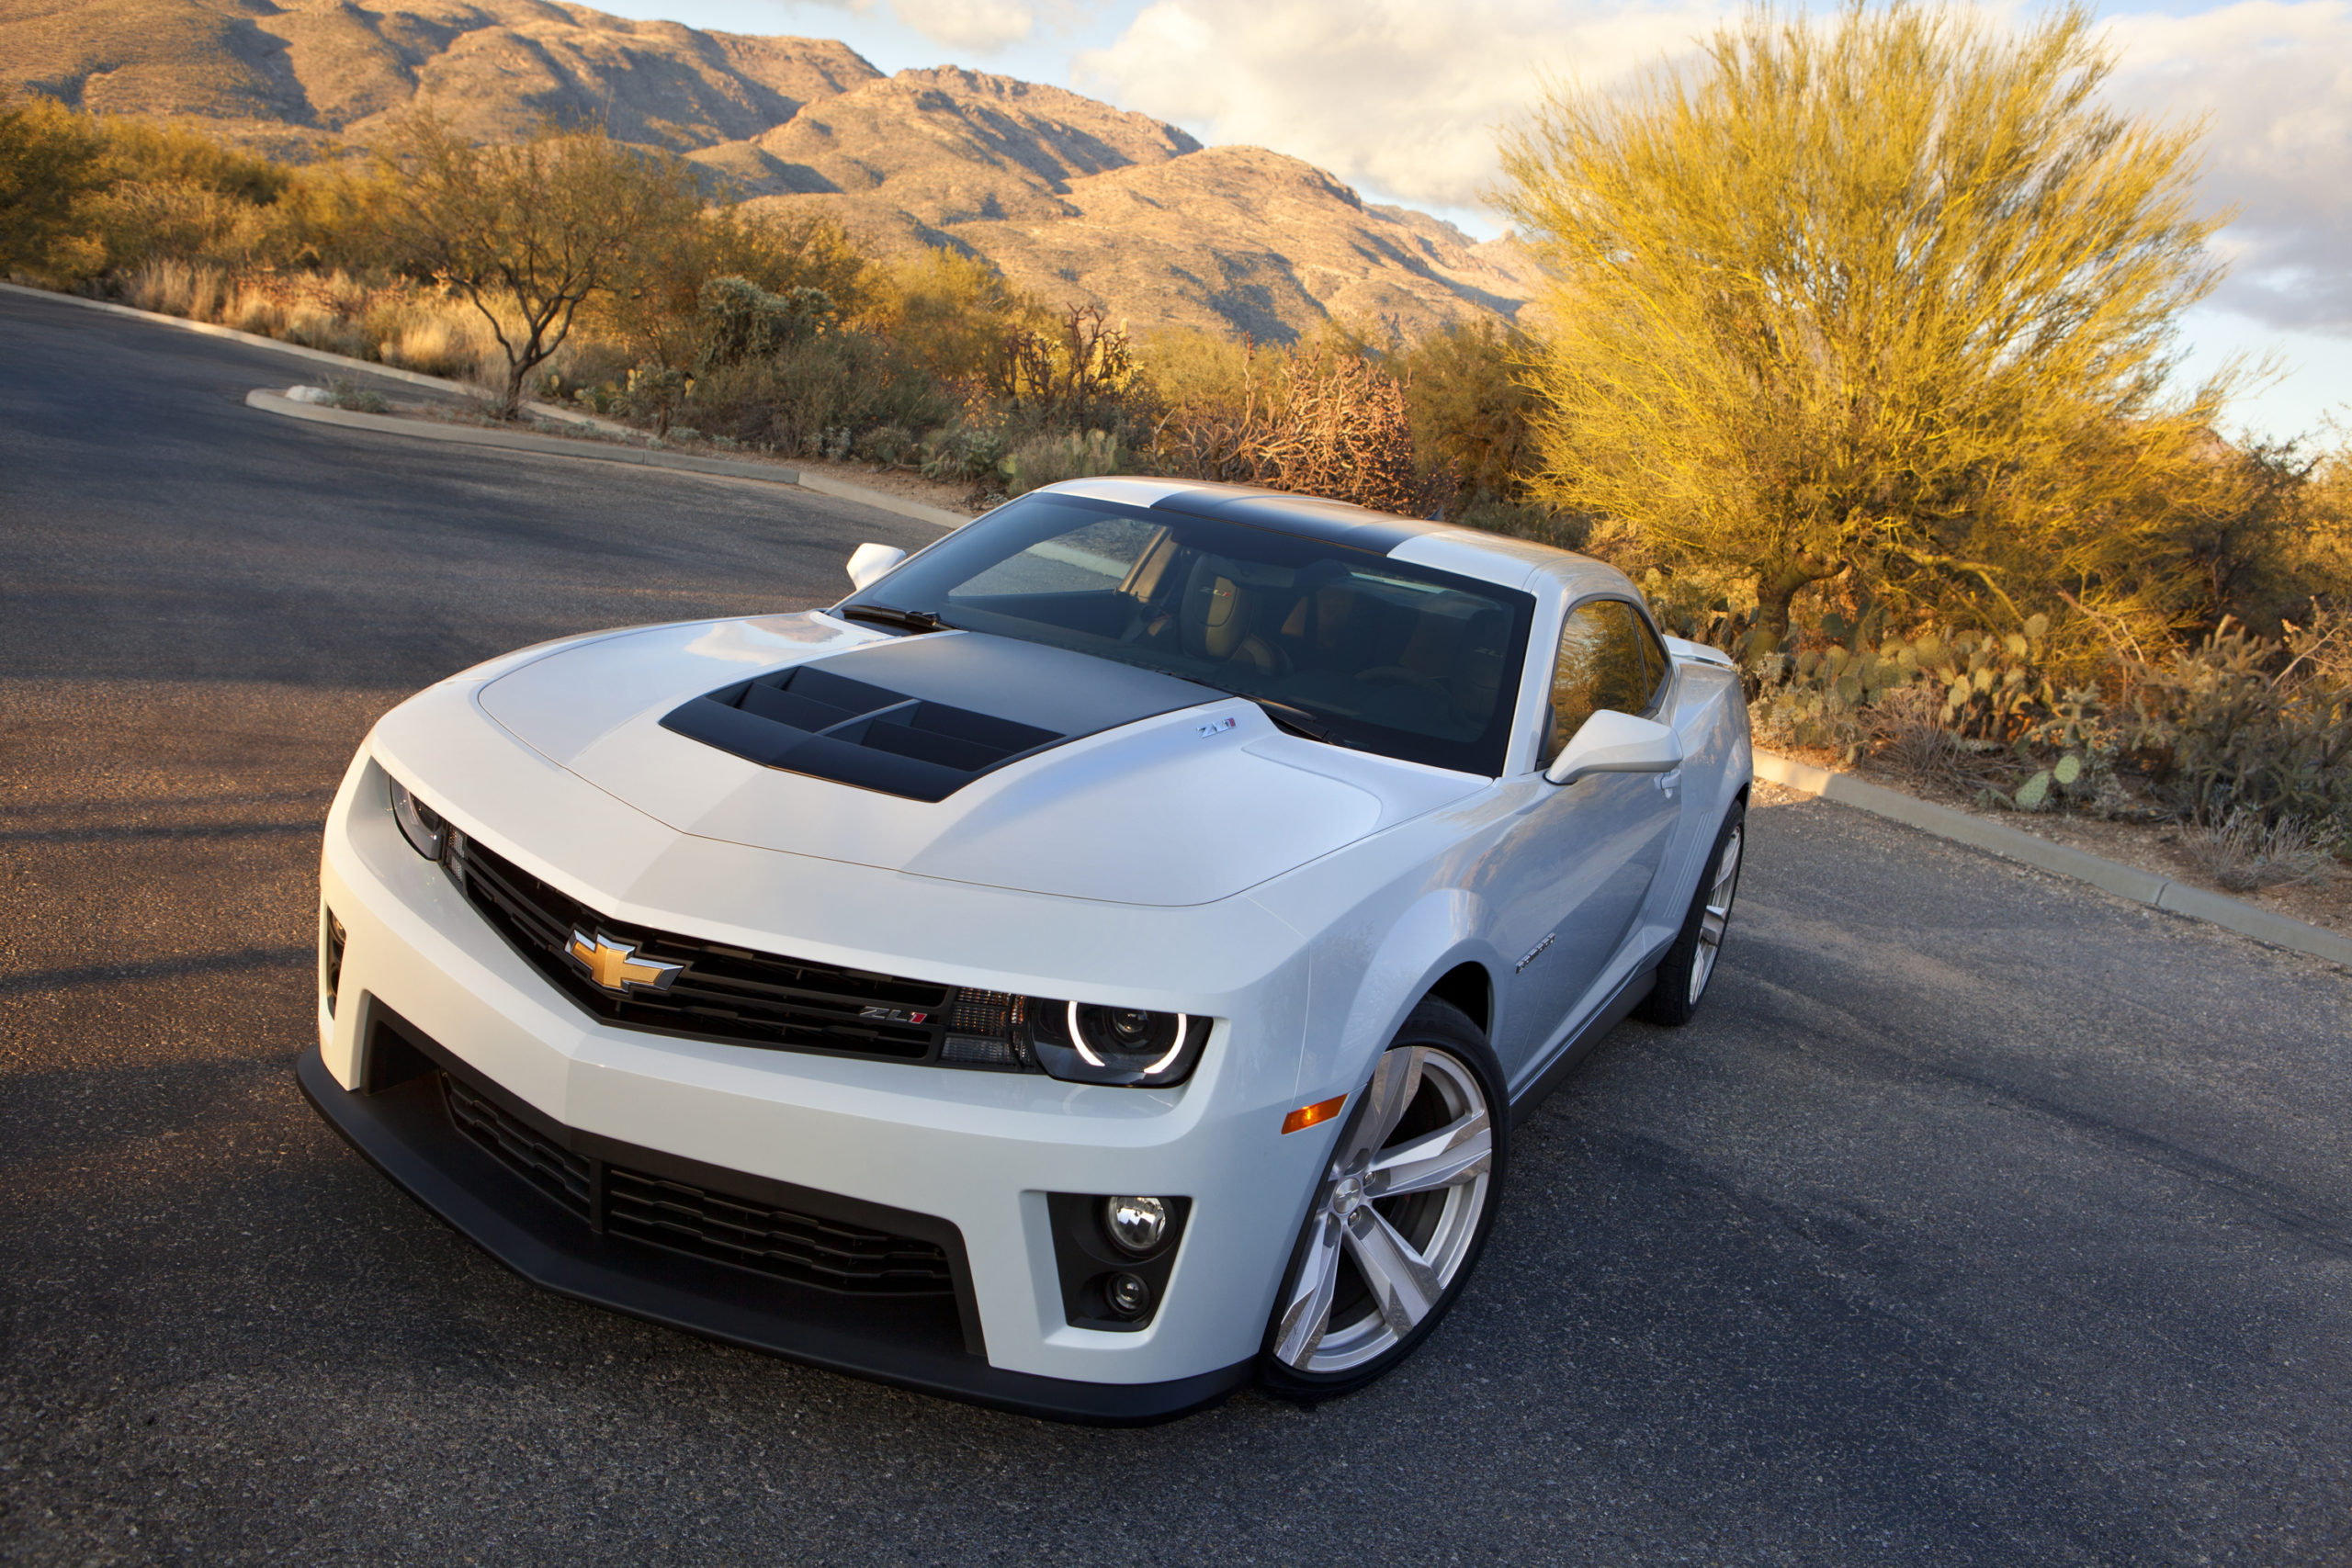 White Chevy Camaro ZL1.com Book Source for free download HD, 4K & high quality wallpaper